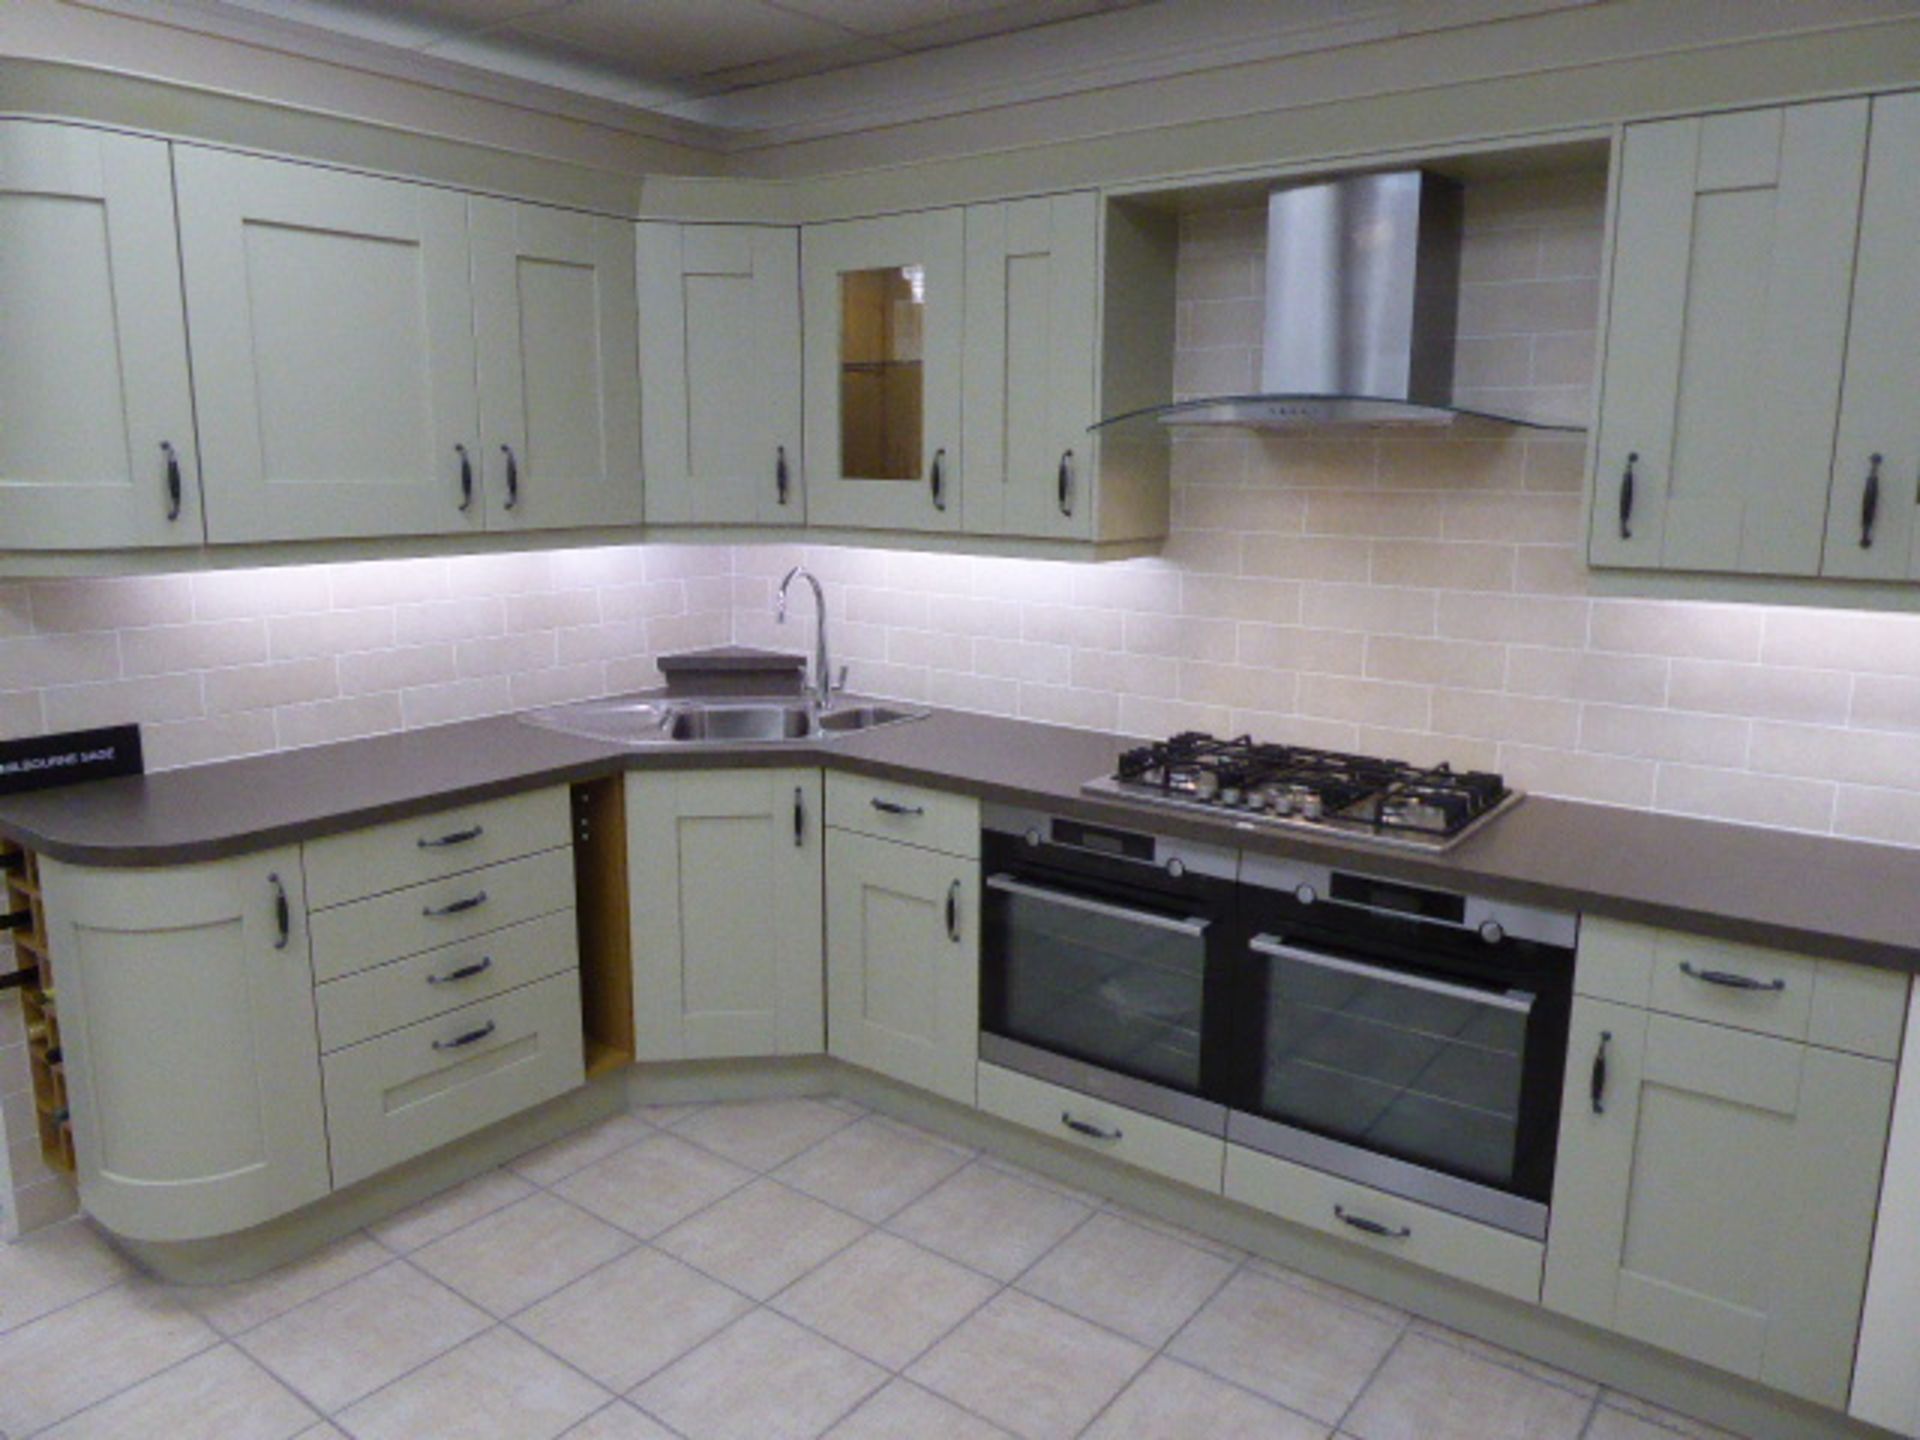 Coleridge and Milbourne sage kitchen with sand stone effect laminate worktops. Max measurement is - Image 2 of 14